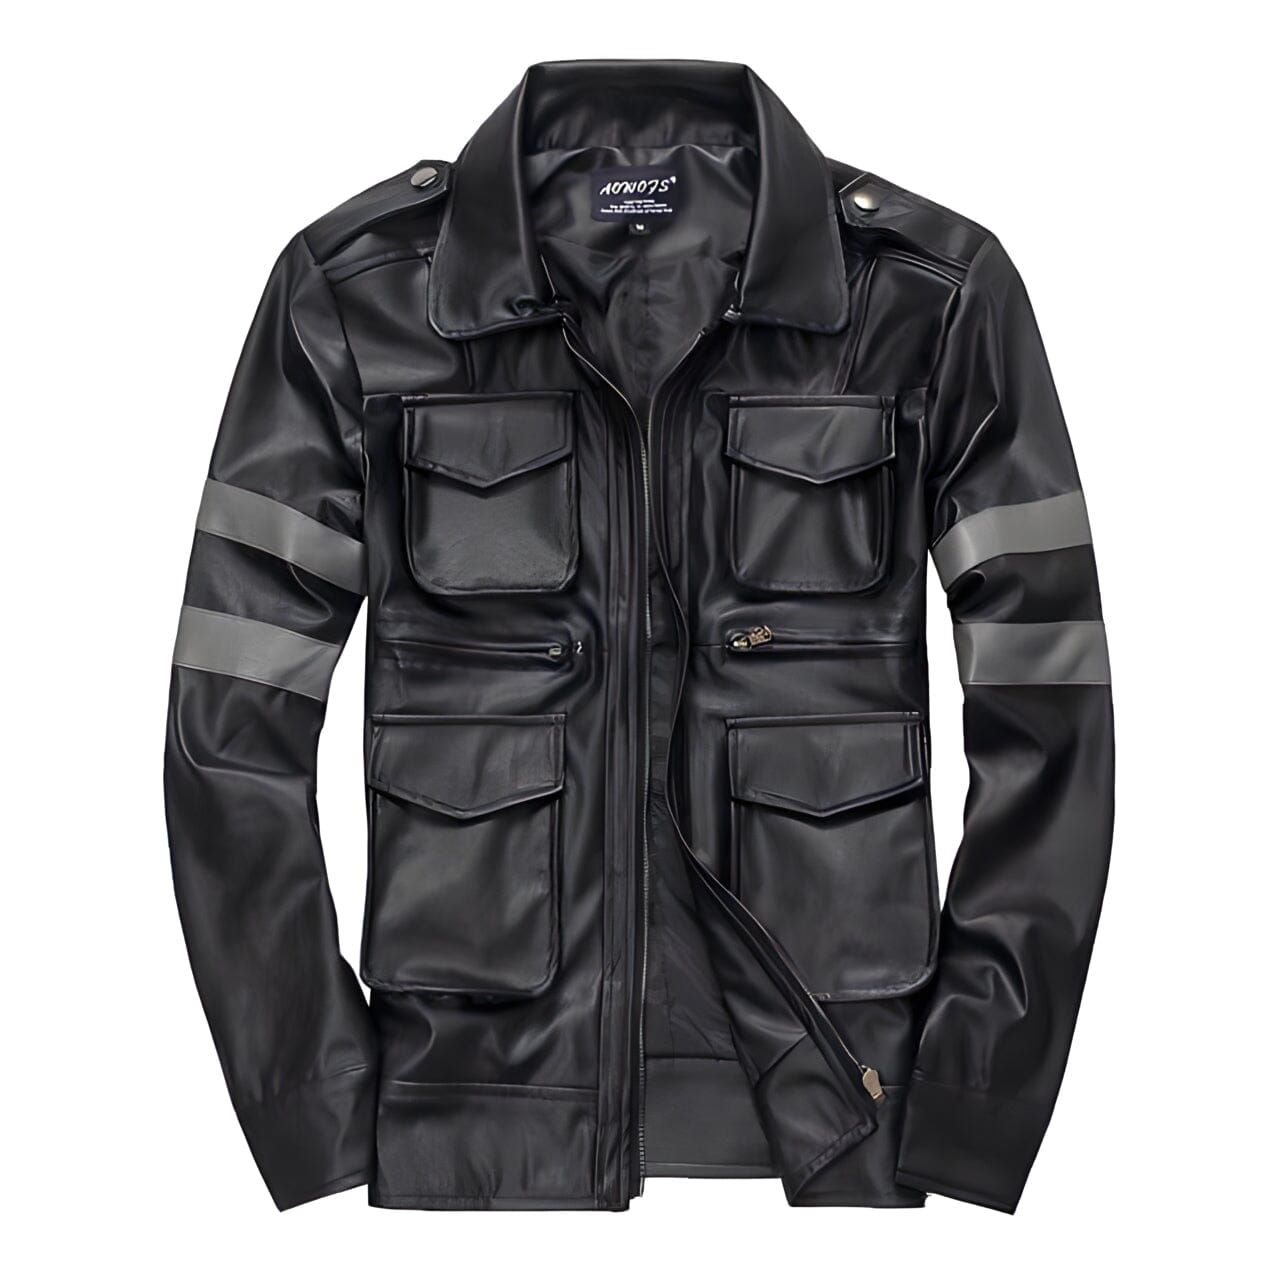 The Luther Striped Faux Leather Biker Jacket - Multiple Colors